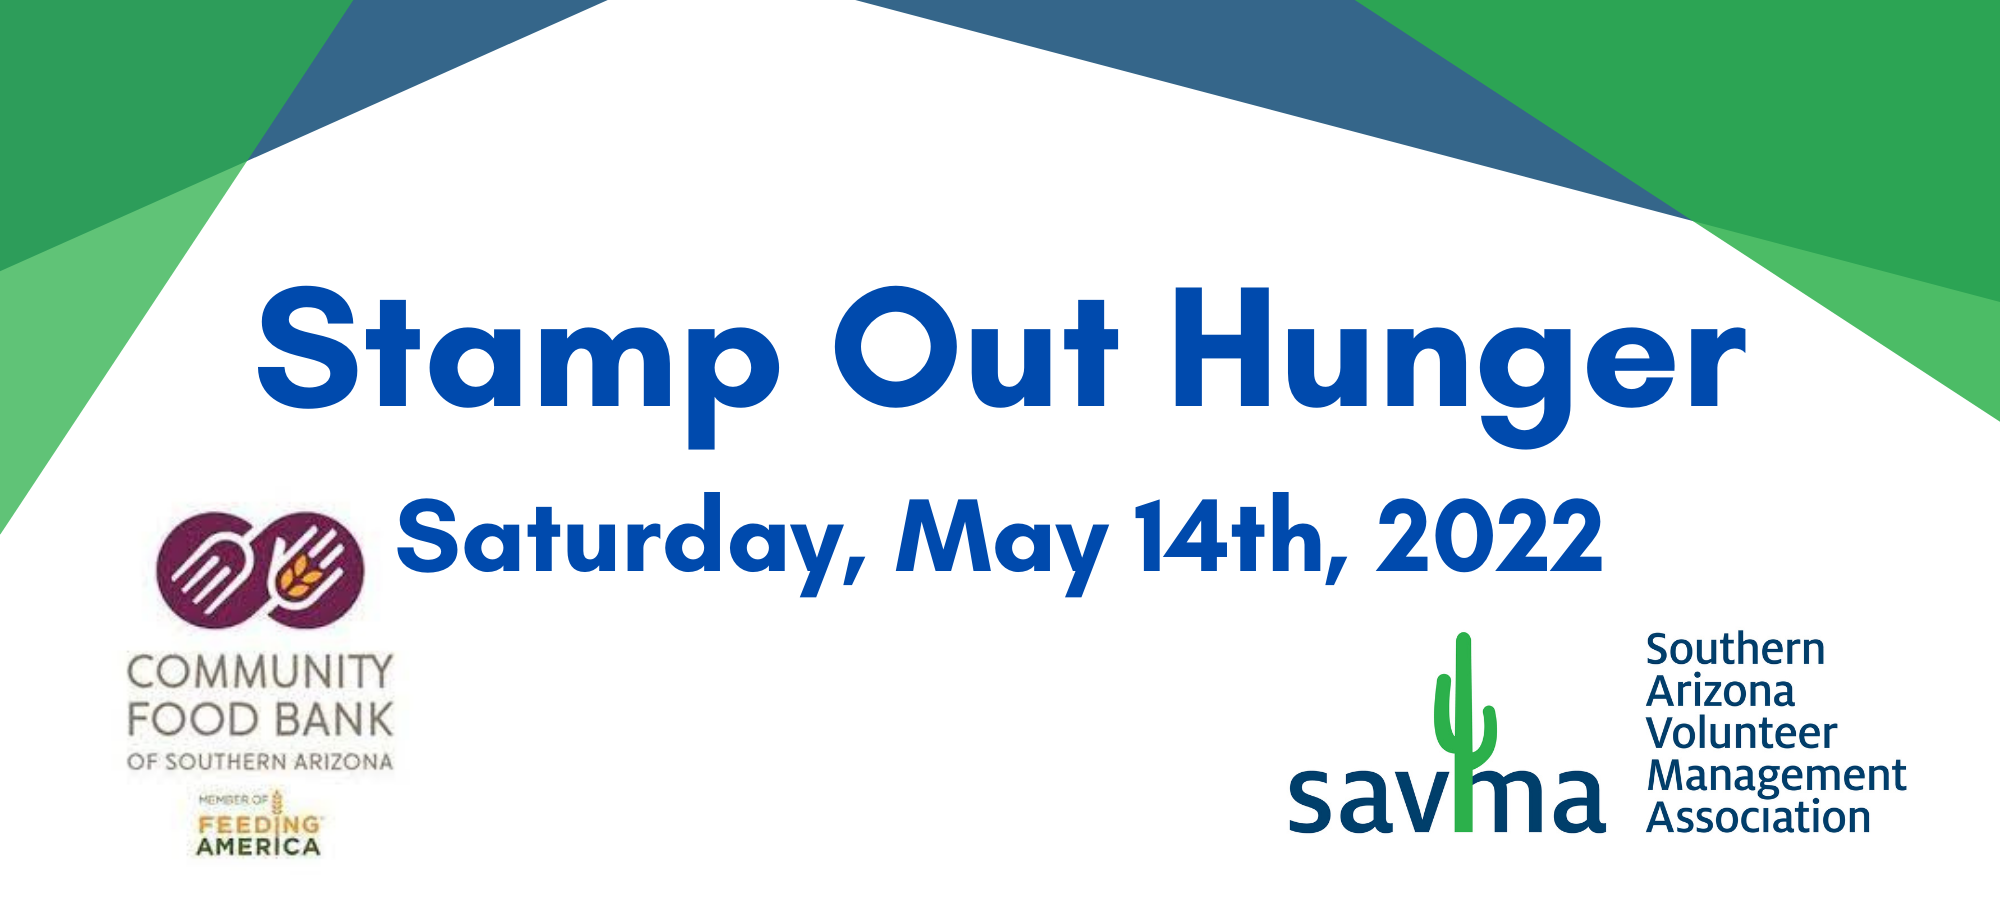 Stamp out hunger, Saturday, May 14th, 2022 a volunteer event opportunity